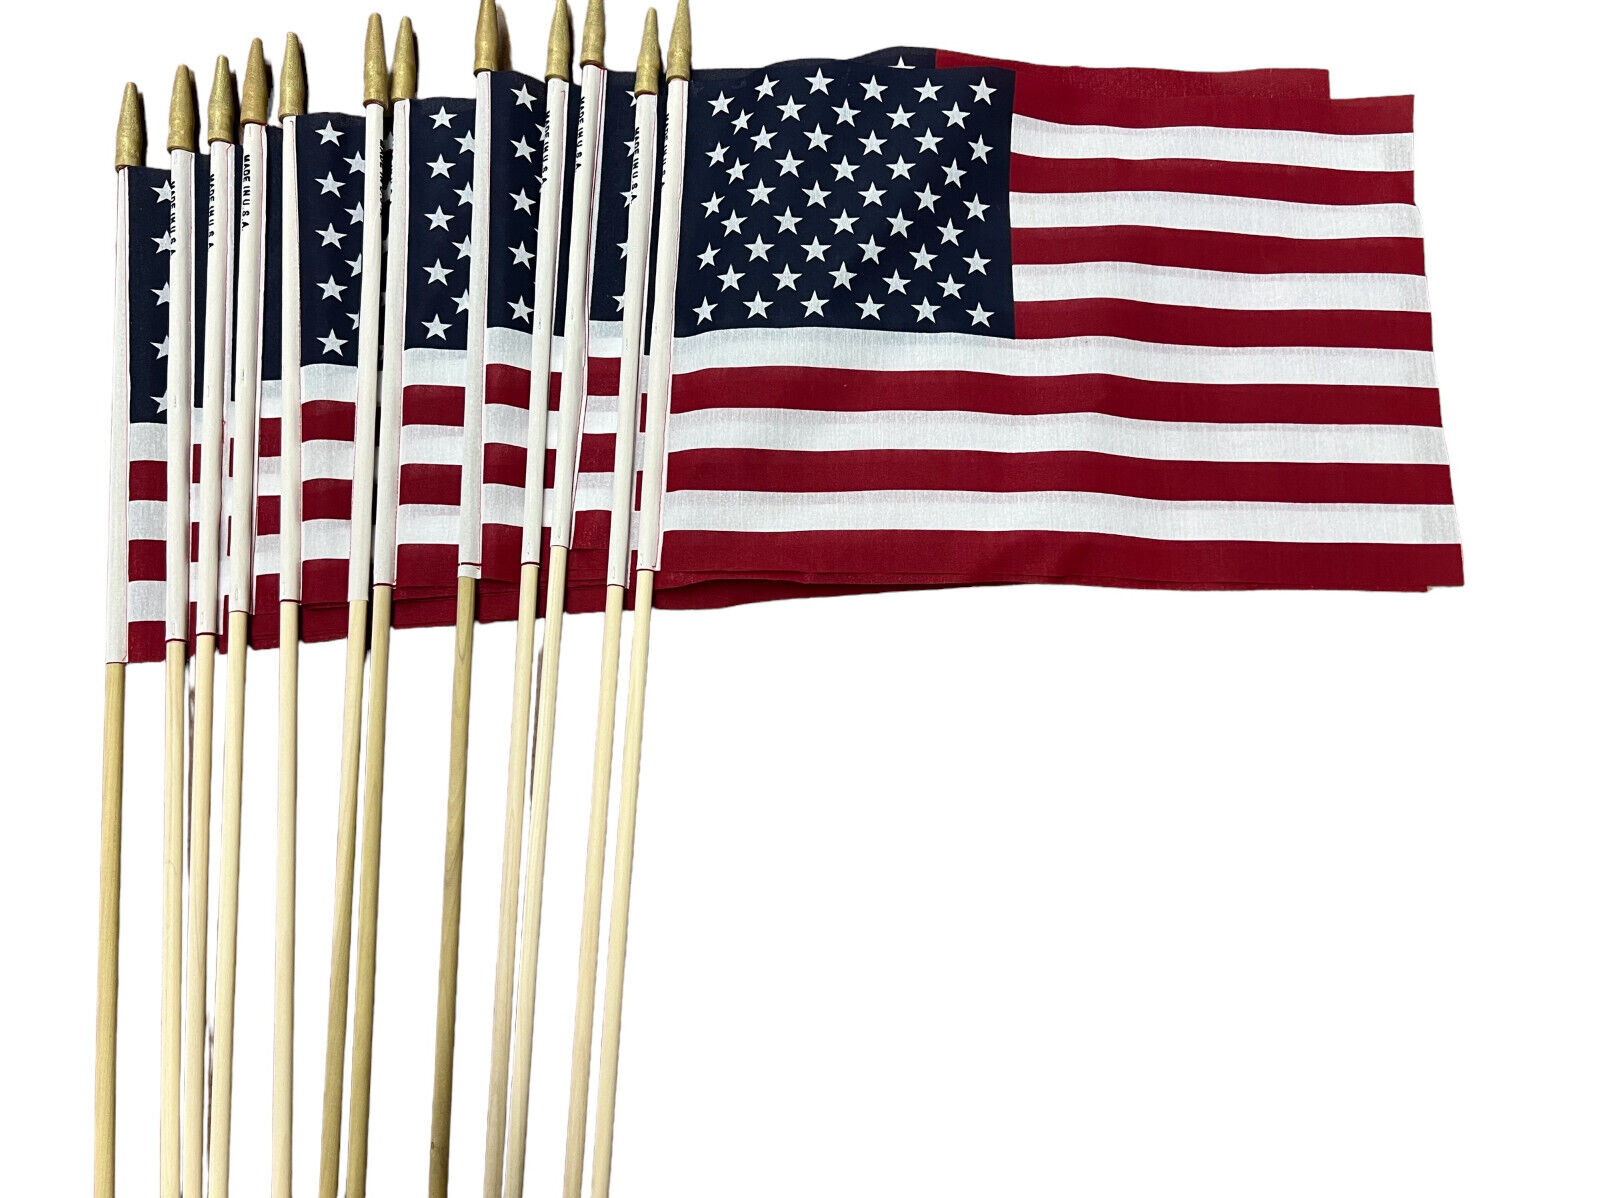 Box of -12- 12x18 Inch Cemetery US American Hand Held Stick Flags Sleeve No Fray